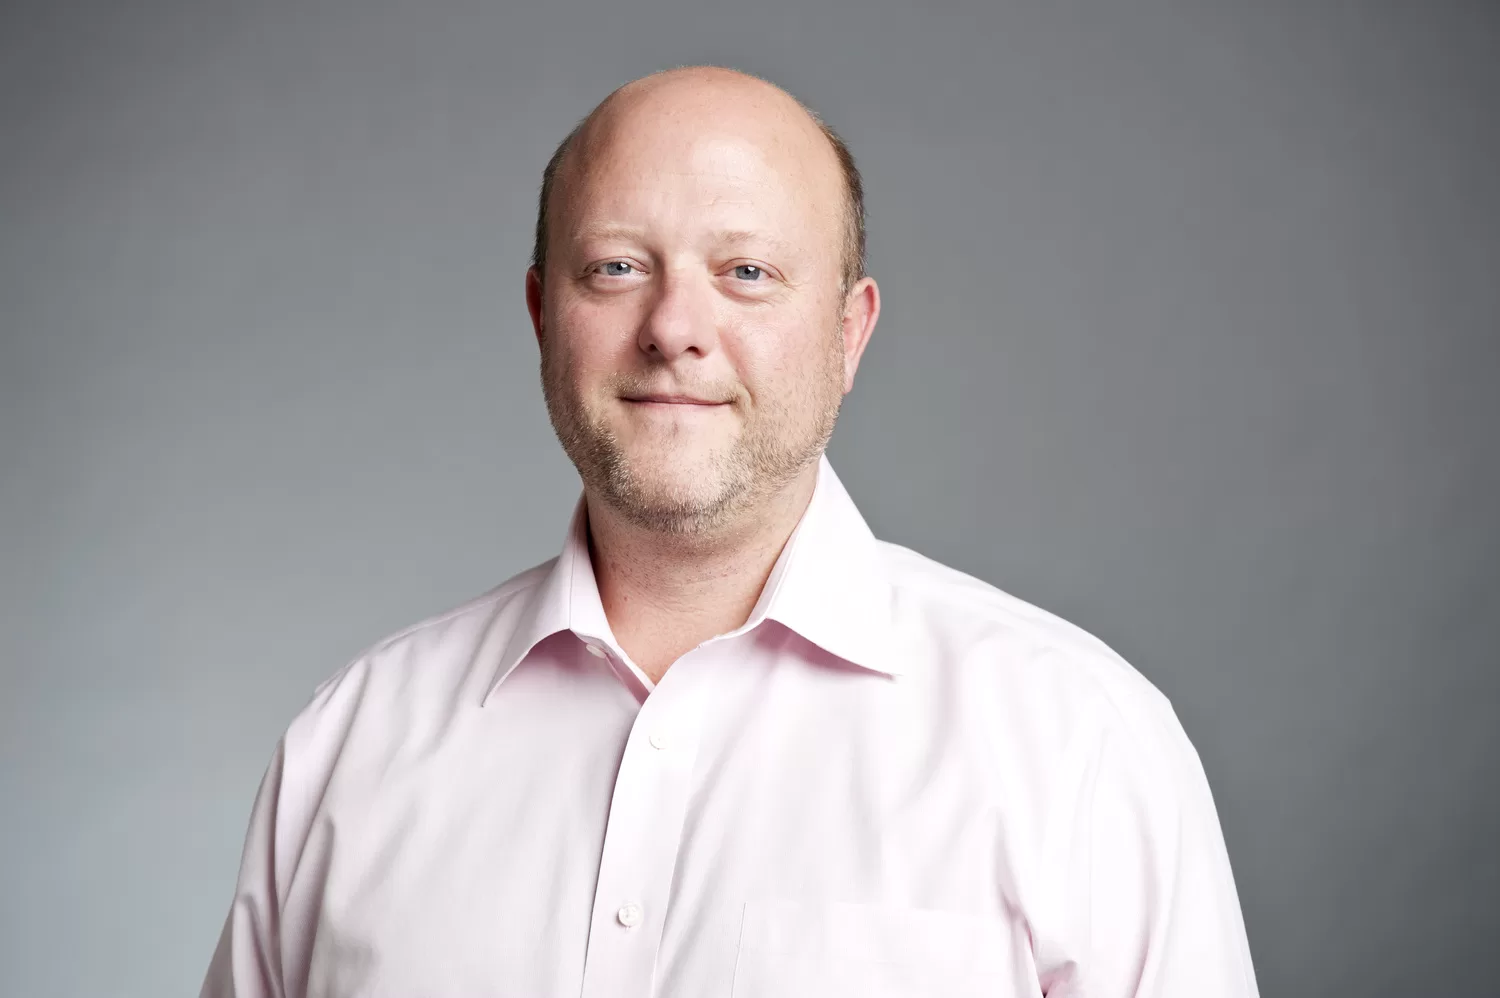 Jeremy Allaire, the CEO of Circle